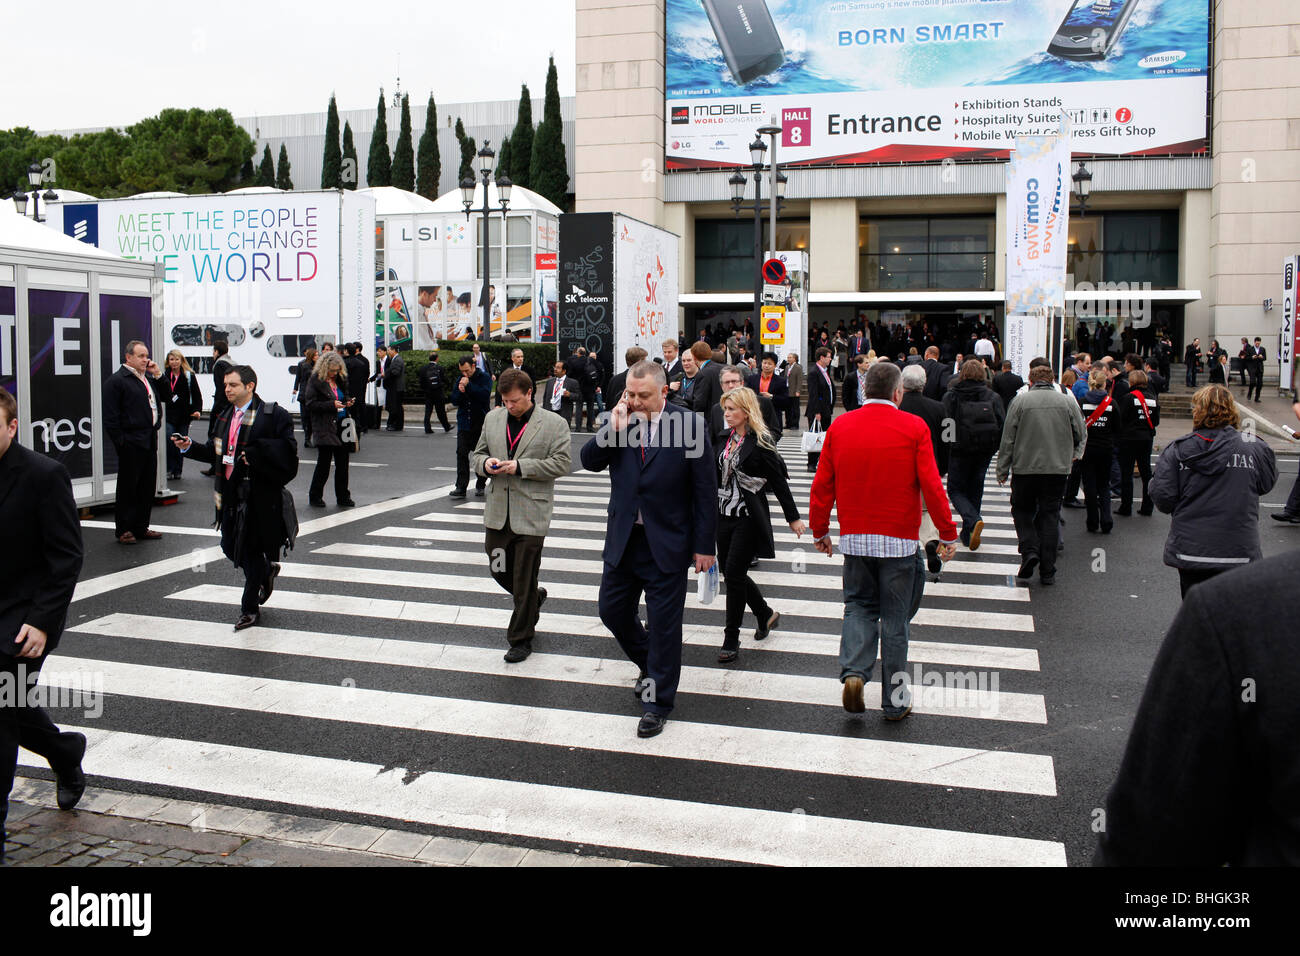 The Mobile World Congress 2010 reunites the latest developments in wireless industry. Stock Photo